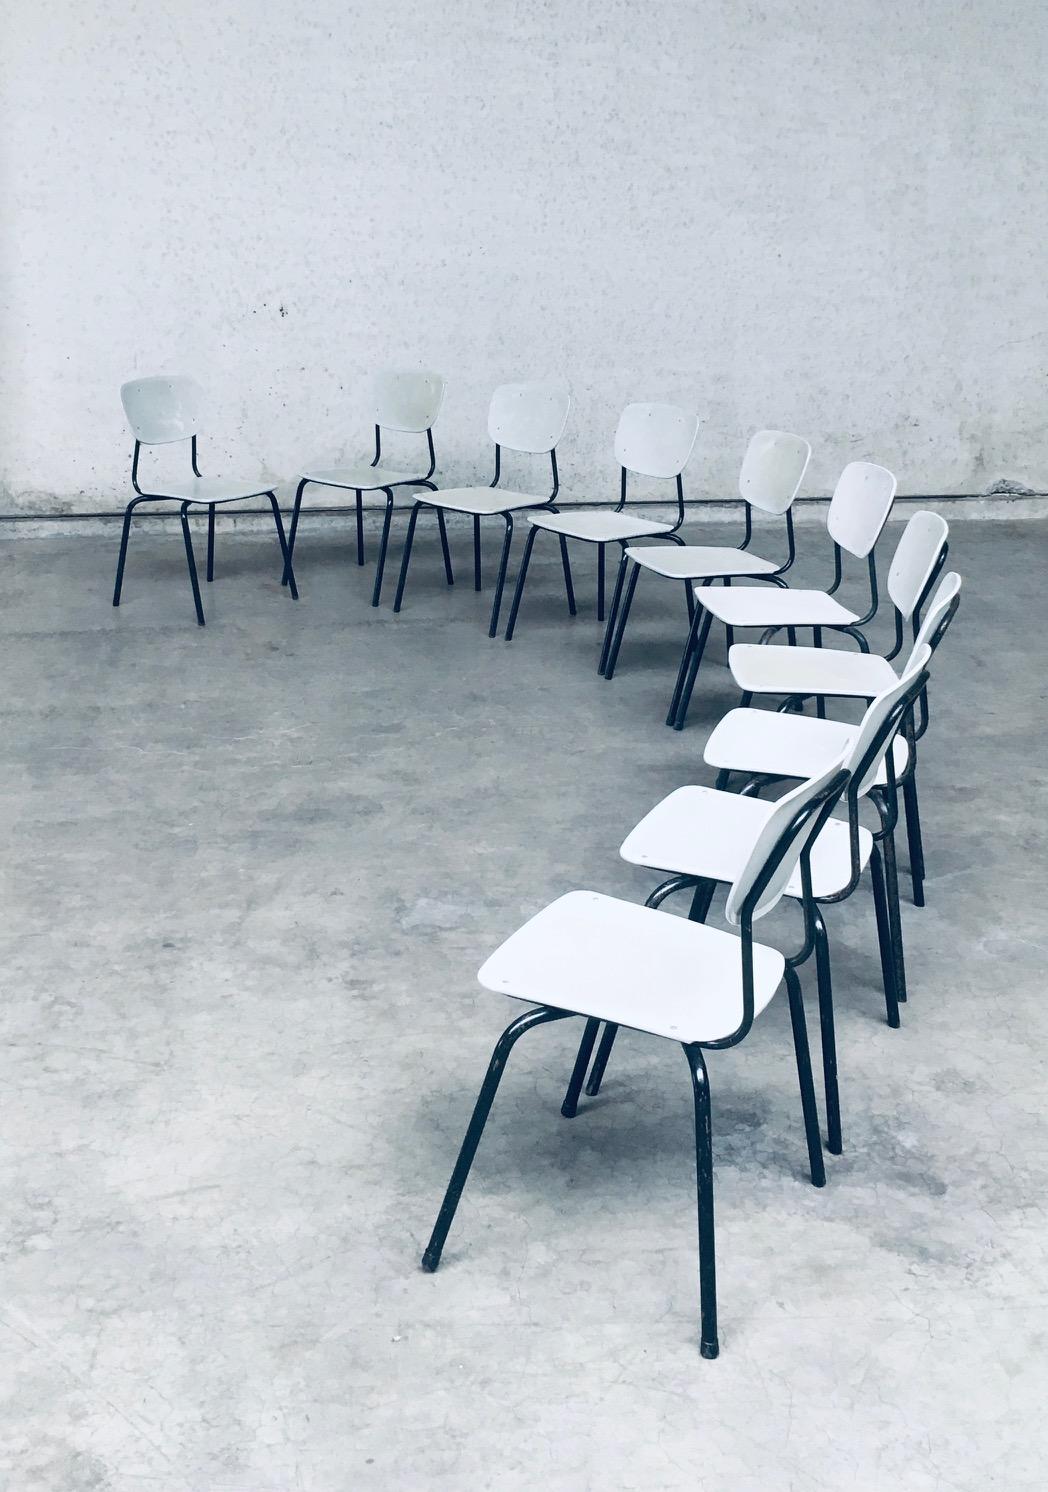 1960's Dutch Industrial Design Stacking Chairs In Fair Condition For Sale In Oud-Turnhout, VAN